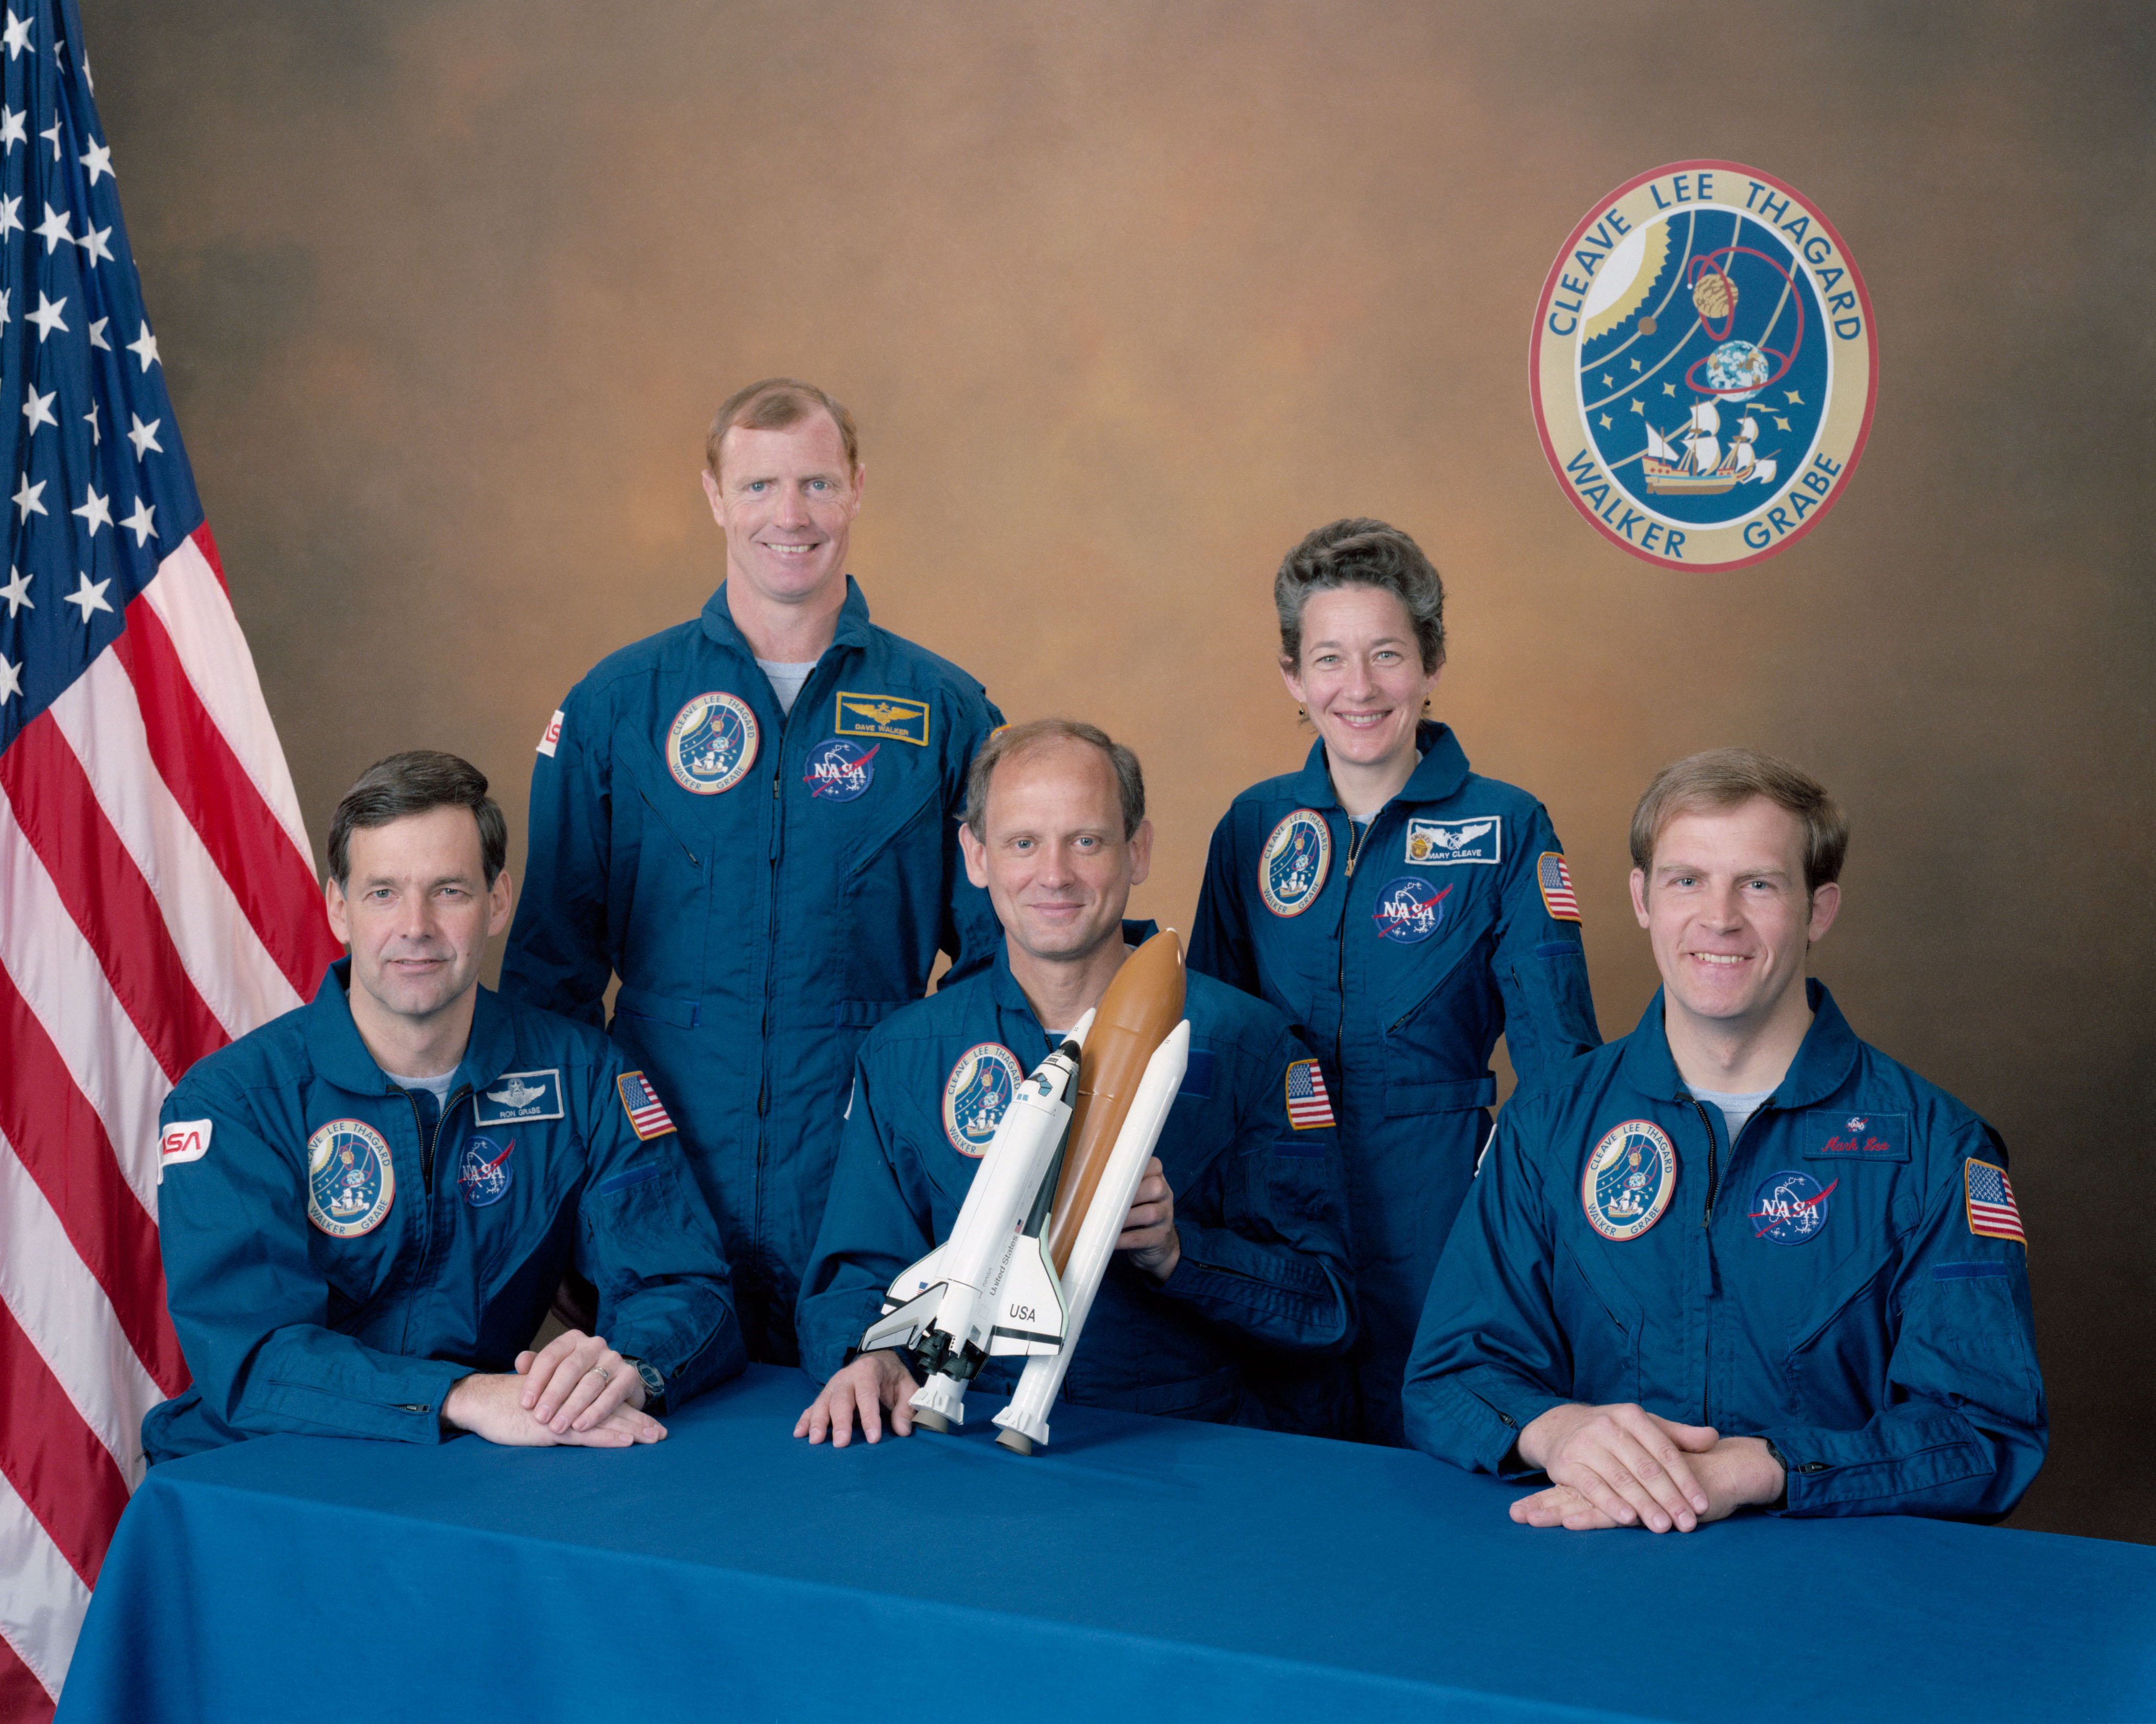 NASA Space Technology The STS-30 crew of Pilot Ronald J. Grabe, left, Commander David M. Walker, and Mission Specialists Norman E. Thagard, Mary L. Lop, and Brand C. Lee